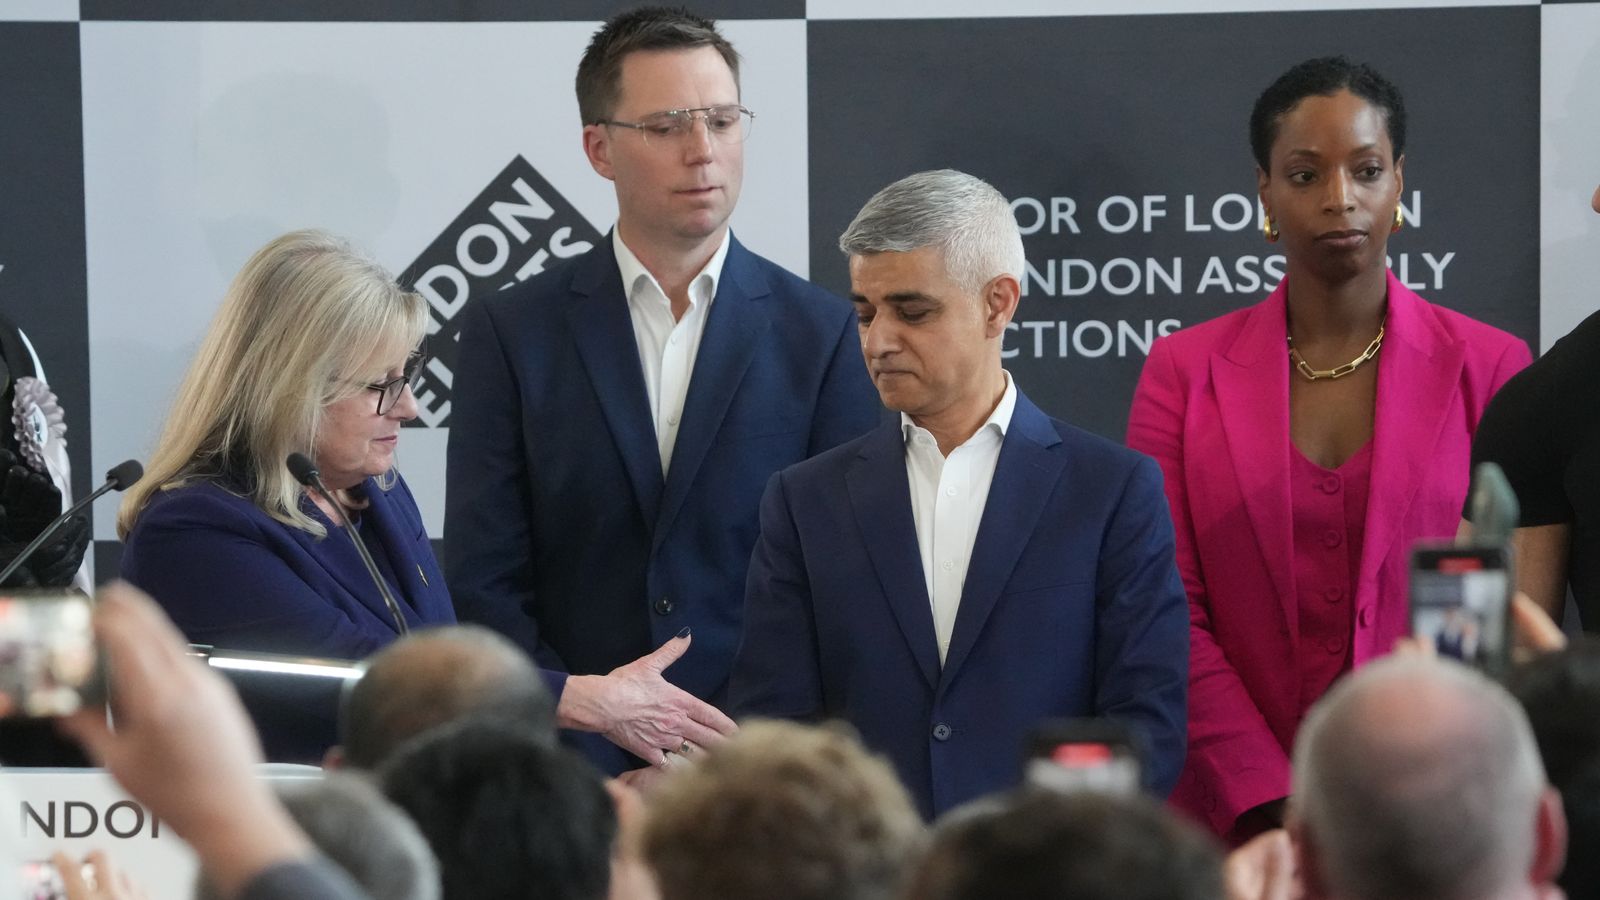 Sadiq Khan secures convincing win over Tory rival in London mayoral race | Politics News